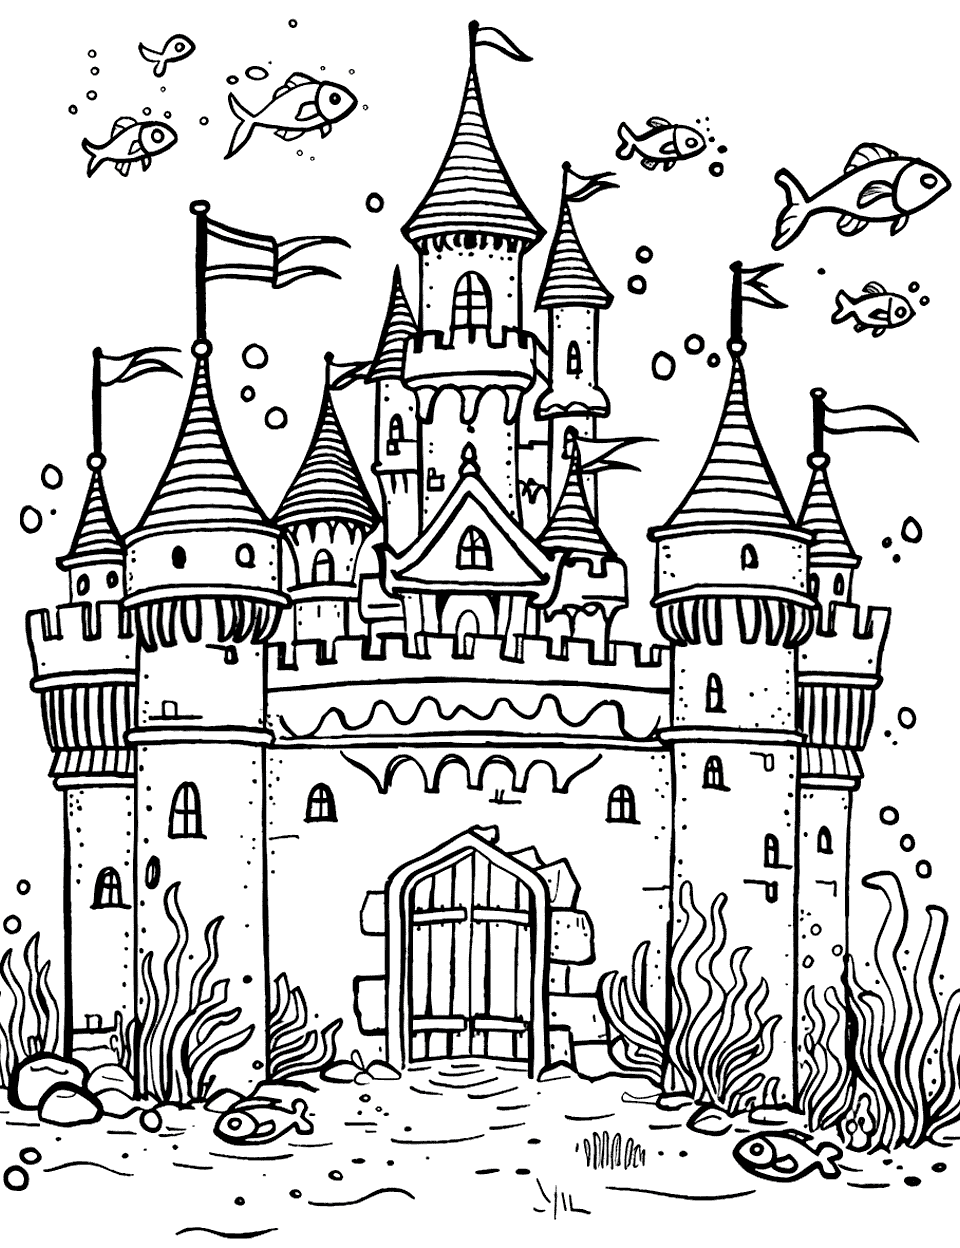 Castle Under the Sea Coloring Page - An underwater scene with a castle surrounded by fish and coral.